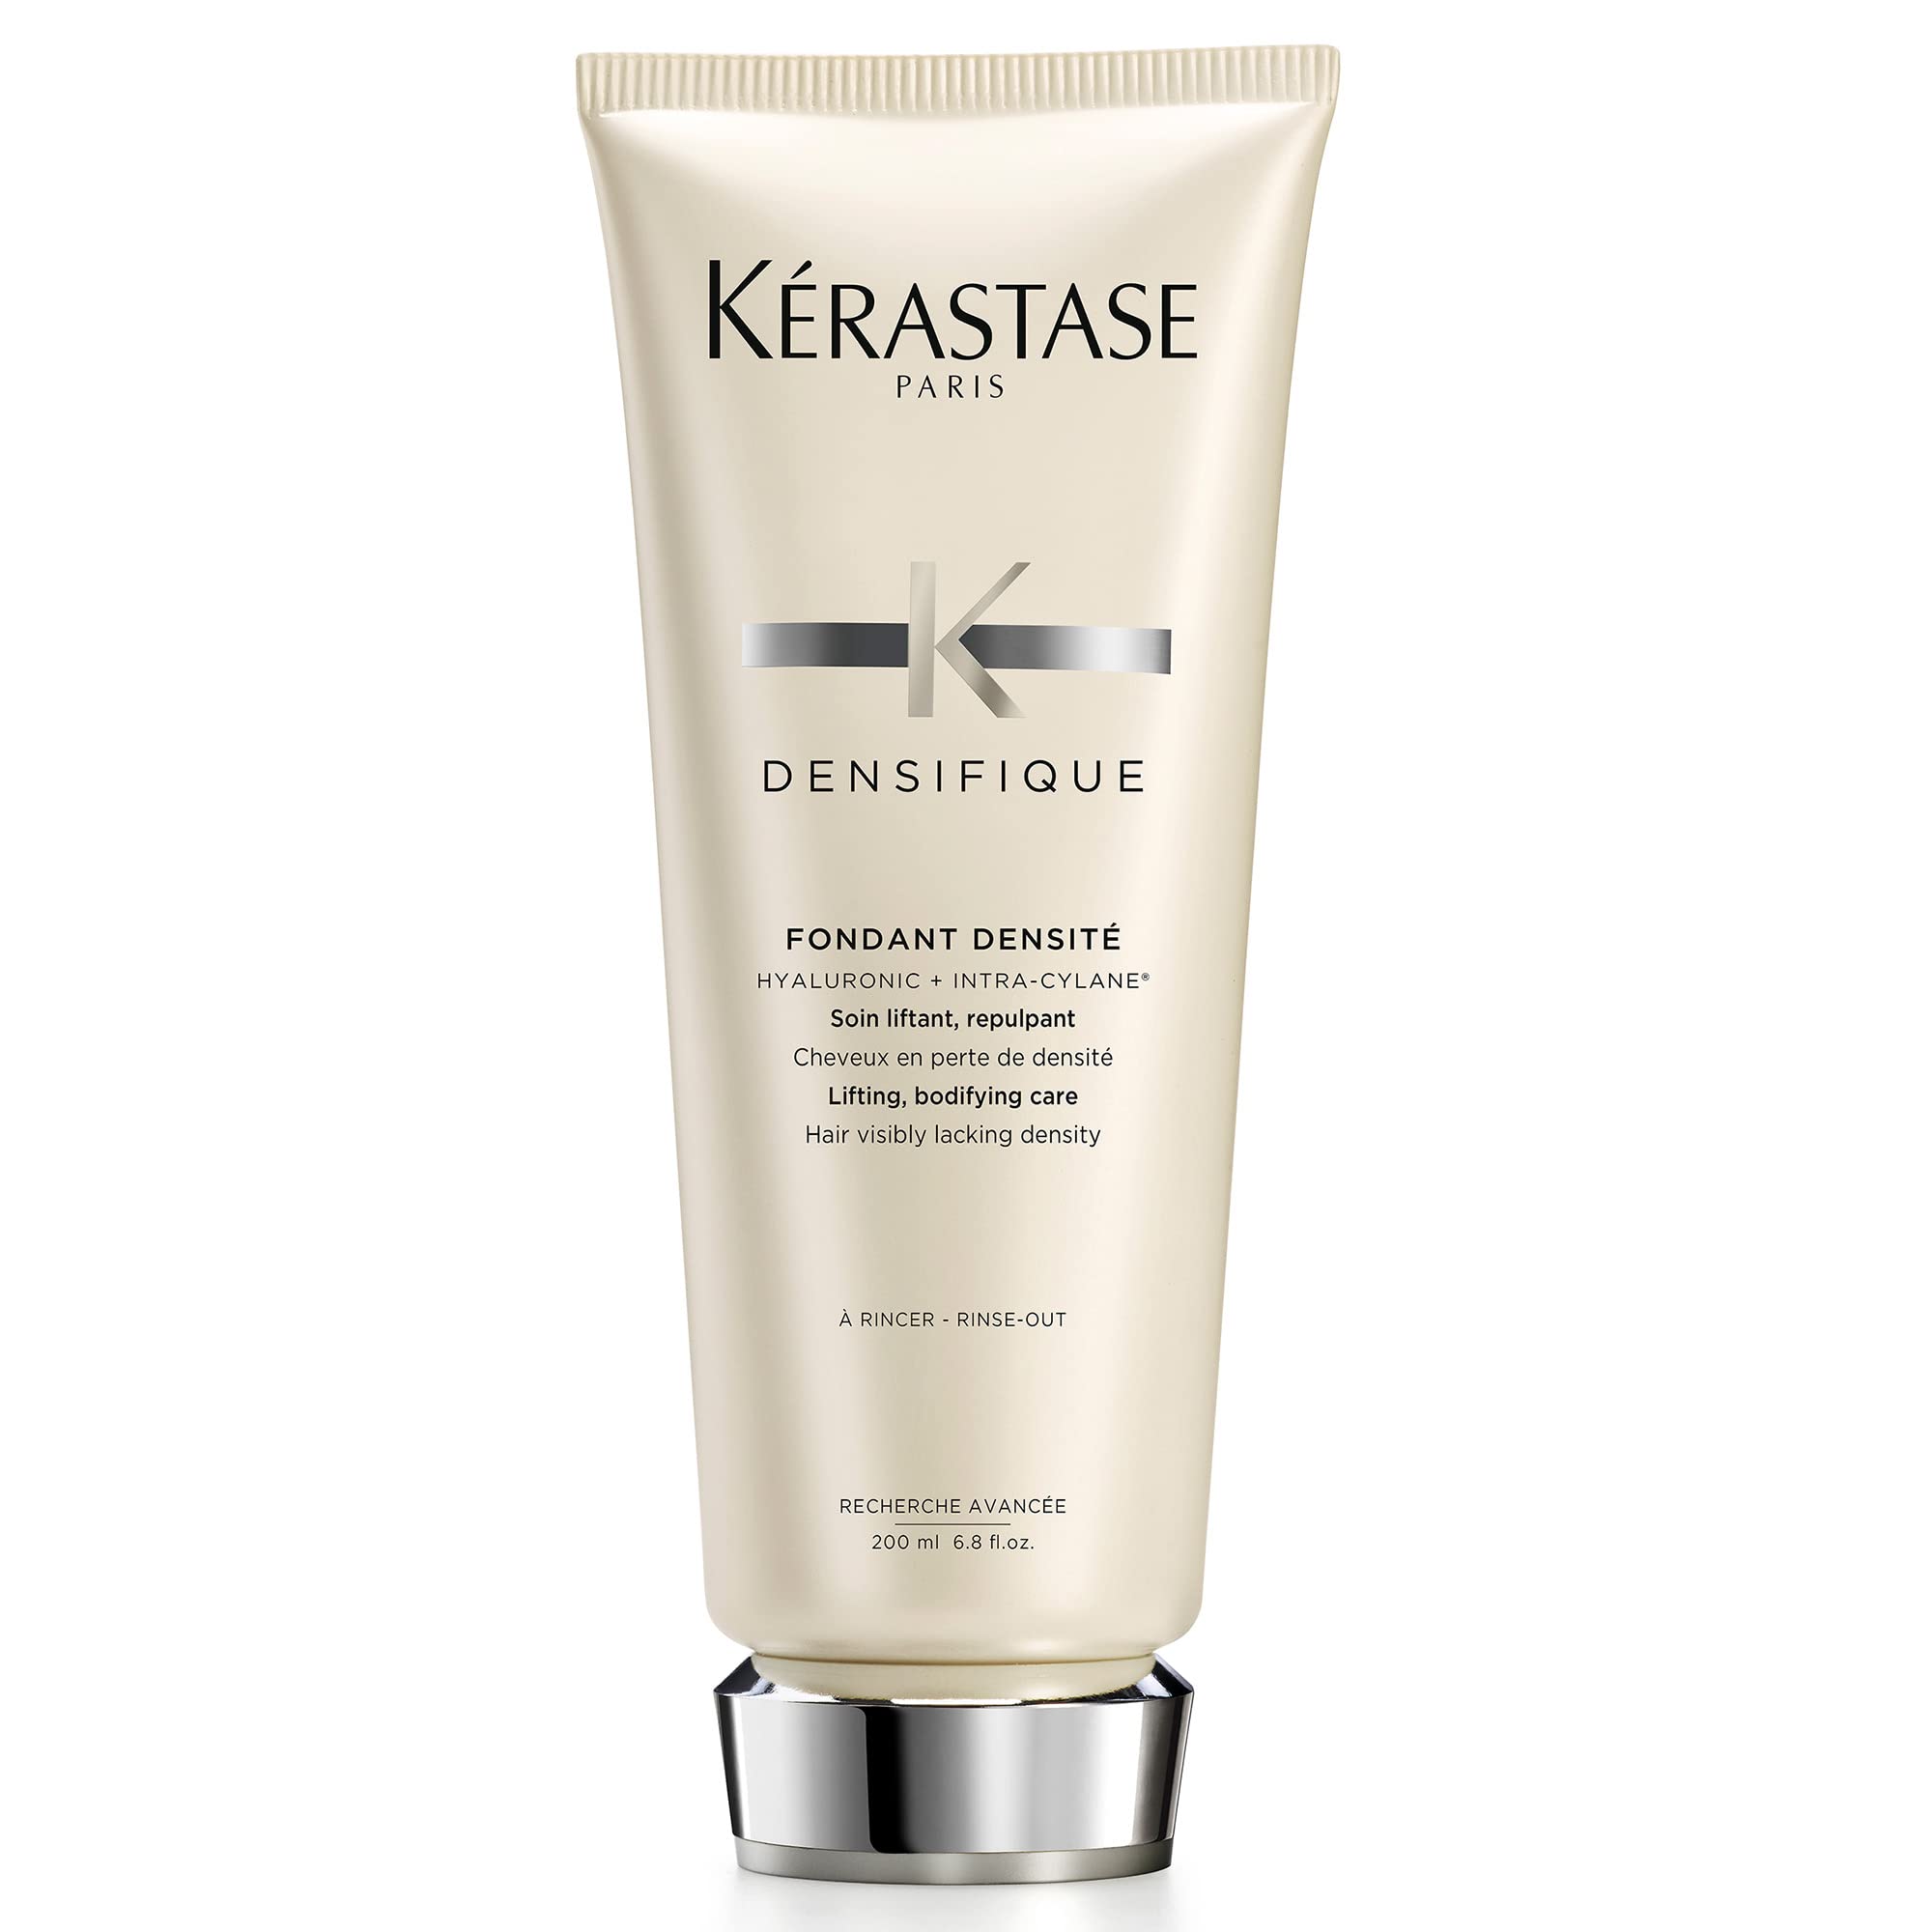 KERASTASE Densifique Densité Conditioner | Thickening, Strengthening & Hydrating Conditioner | For Thicker & Fuller Looking Hair | With Hyaluronic Acid | For Fine, Thin & Thinning Hair | 6.8 Fl Oz